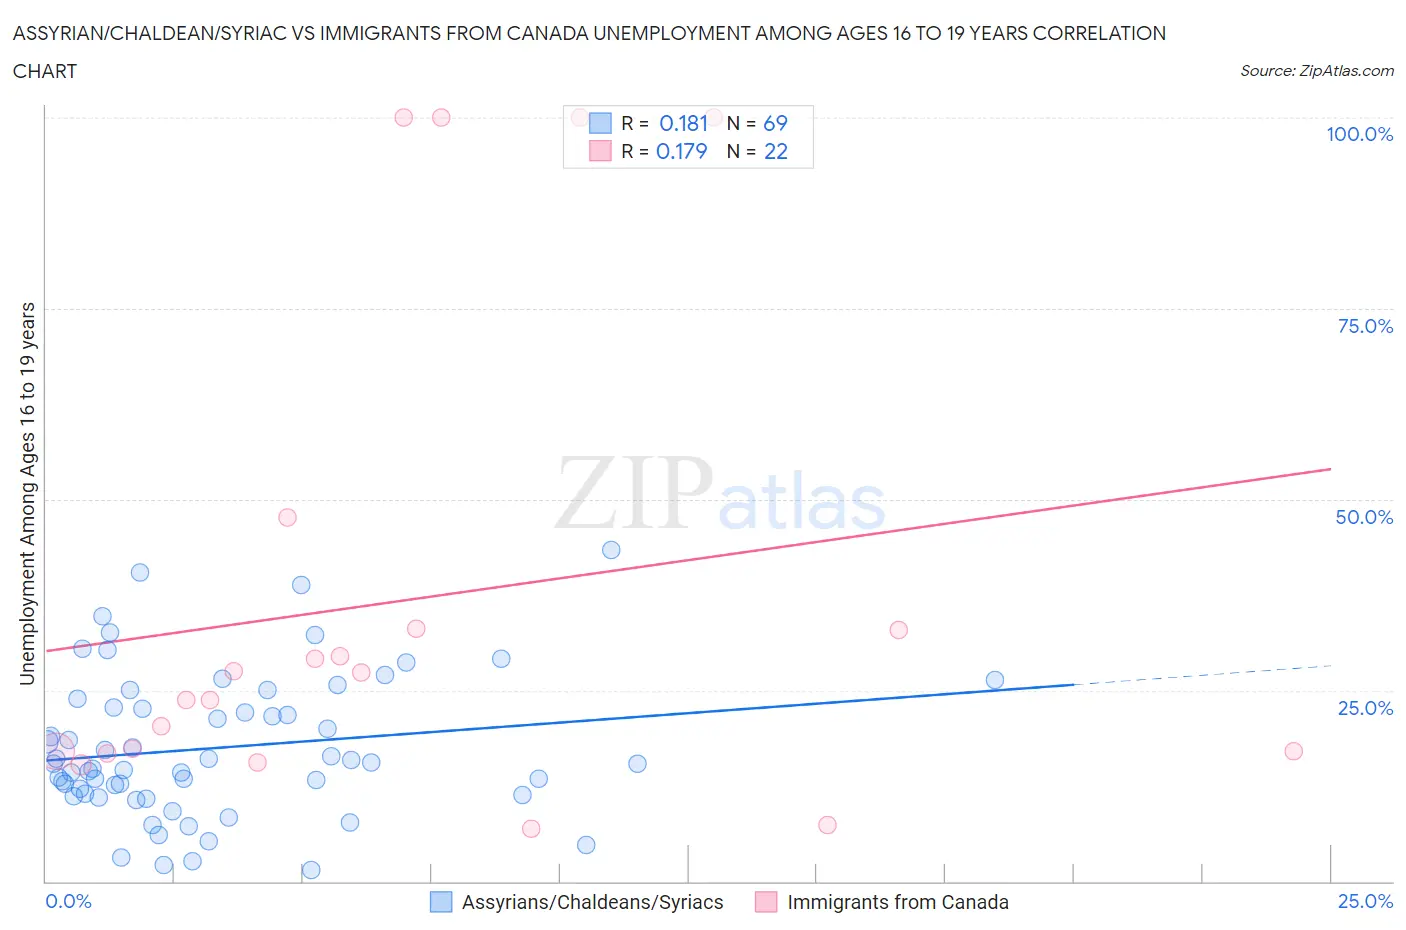 Assyrian/Chaldean/Syriac vs Immigrants from Canada Unemployment Among Ages 16 to 19 years